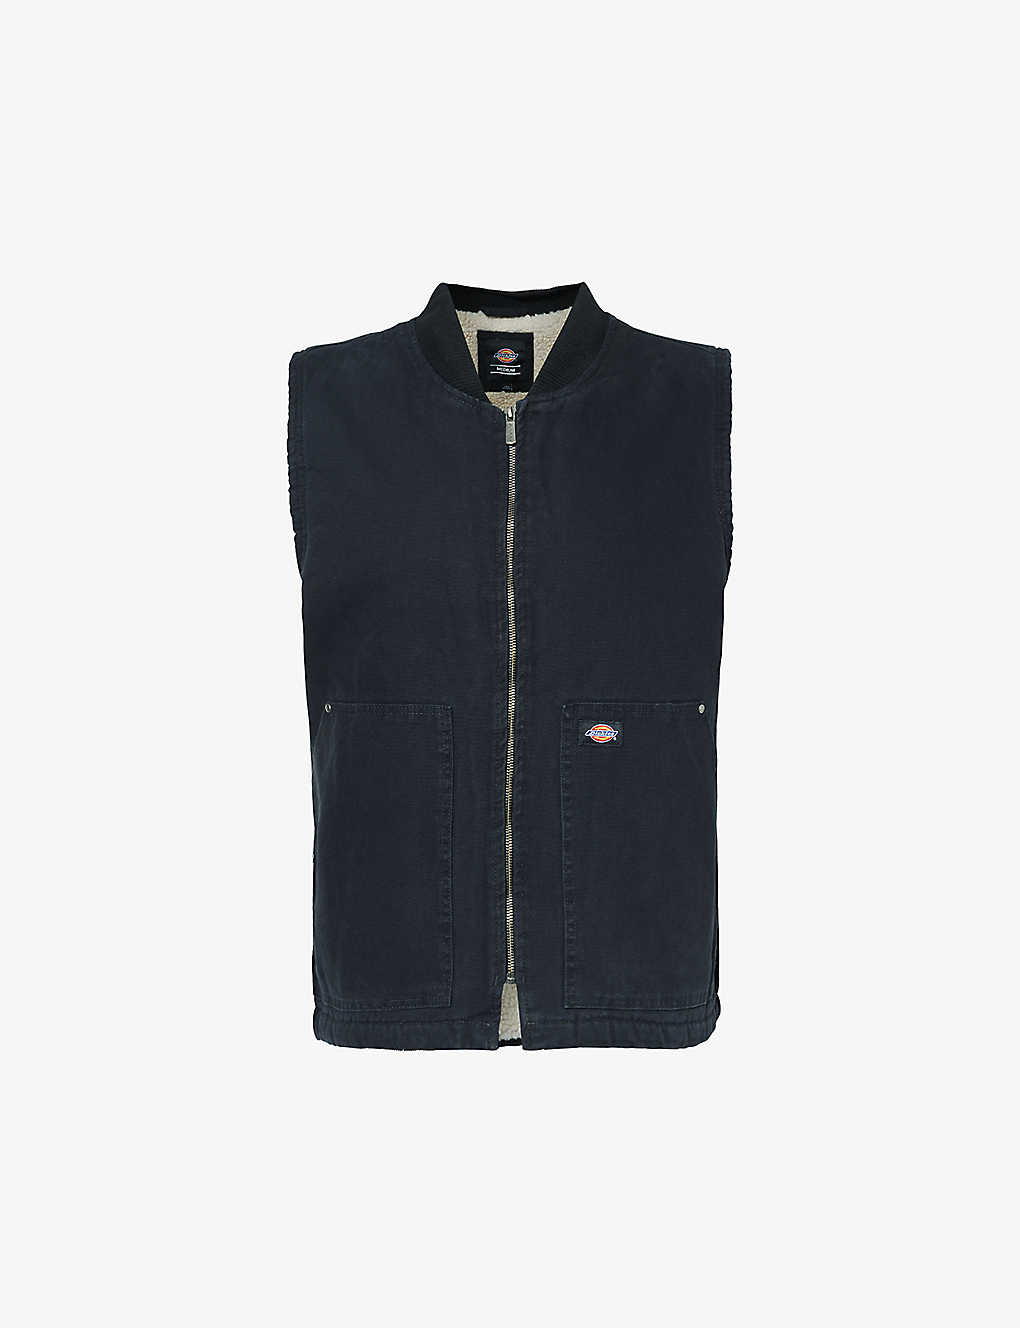 DICKIES DICKIES MEN'S STONE WASHED BLACK DUCK LOGO-PATCH RELAXED-FIT COTTON VEST